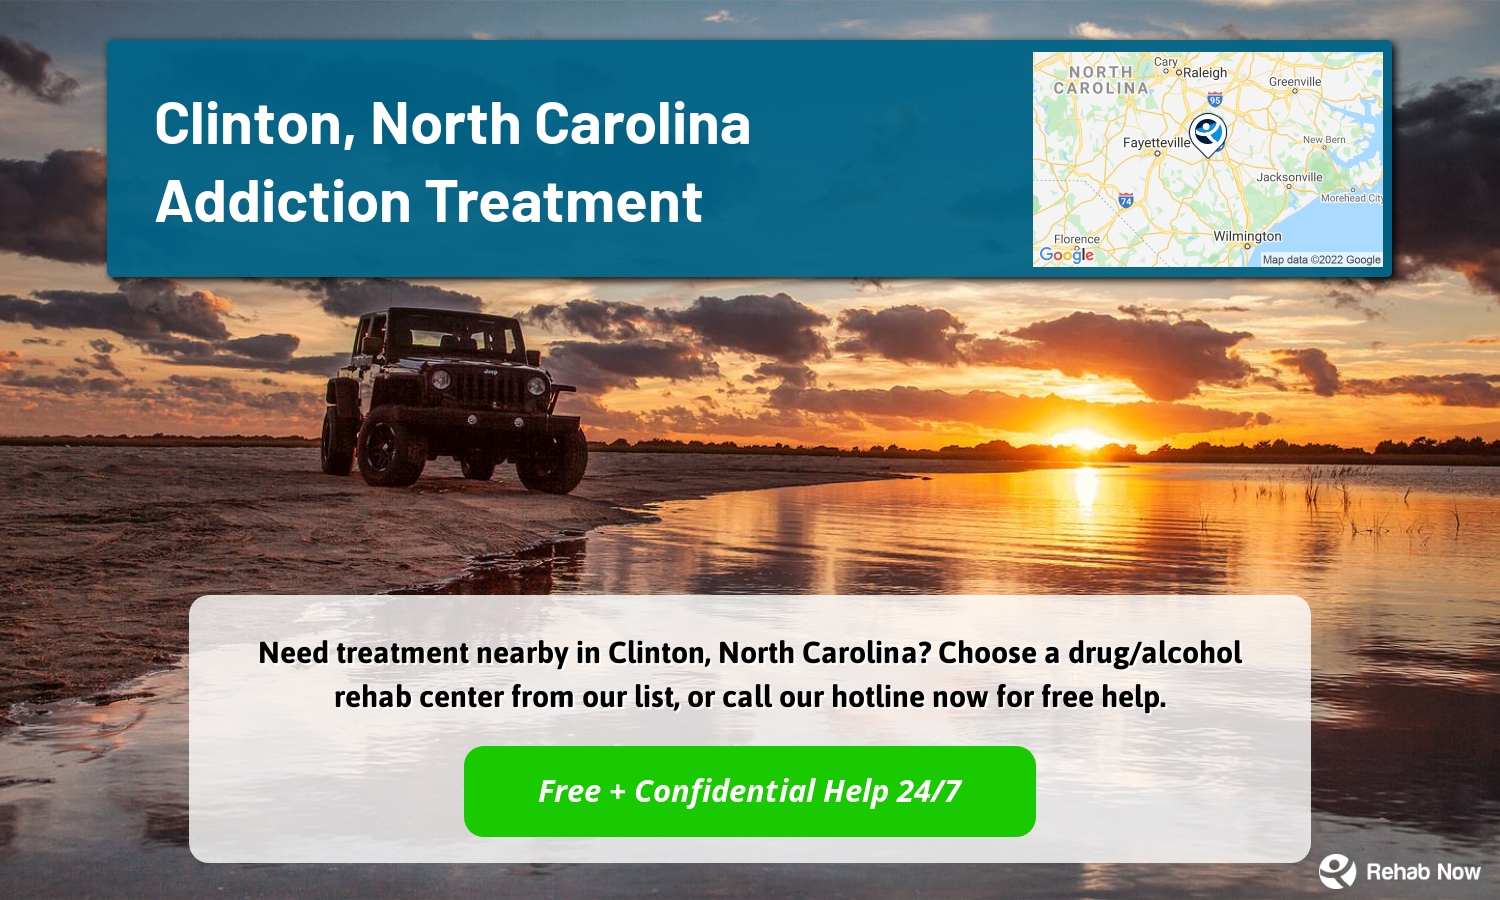 Need treatment nearby in Clinton, North Carolina? Choose a drug/alcohol rehab center from our list, or call our hotline now for free help.